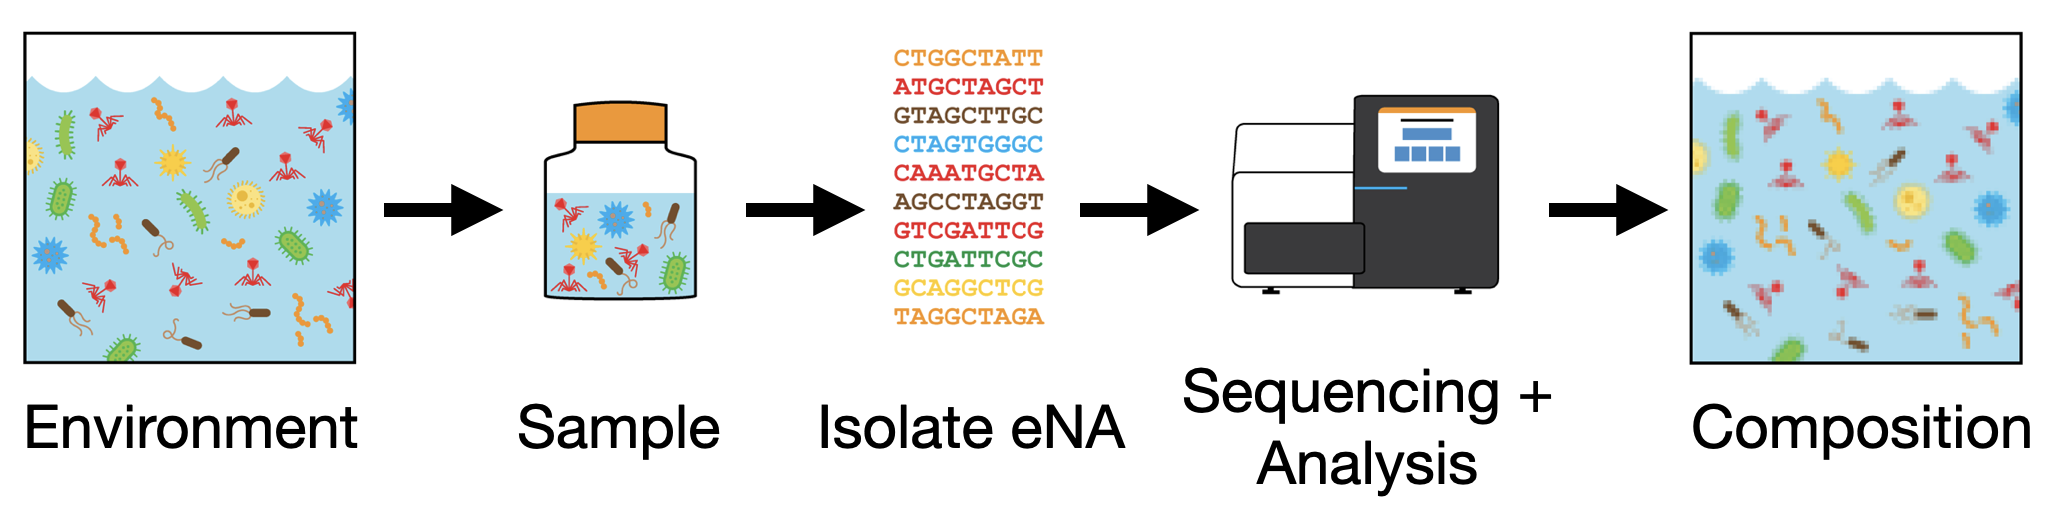 A schematic of environmental nucleic acid (NA) collection, isolation, and analysis that essentially provides a pixelated view of the environment that was sampled